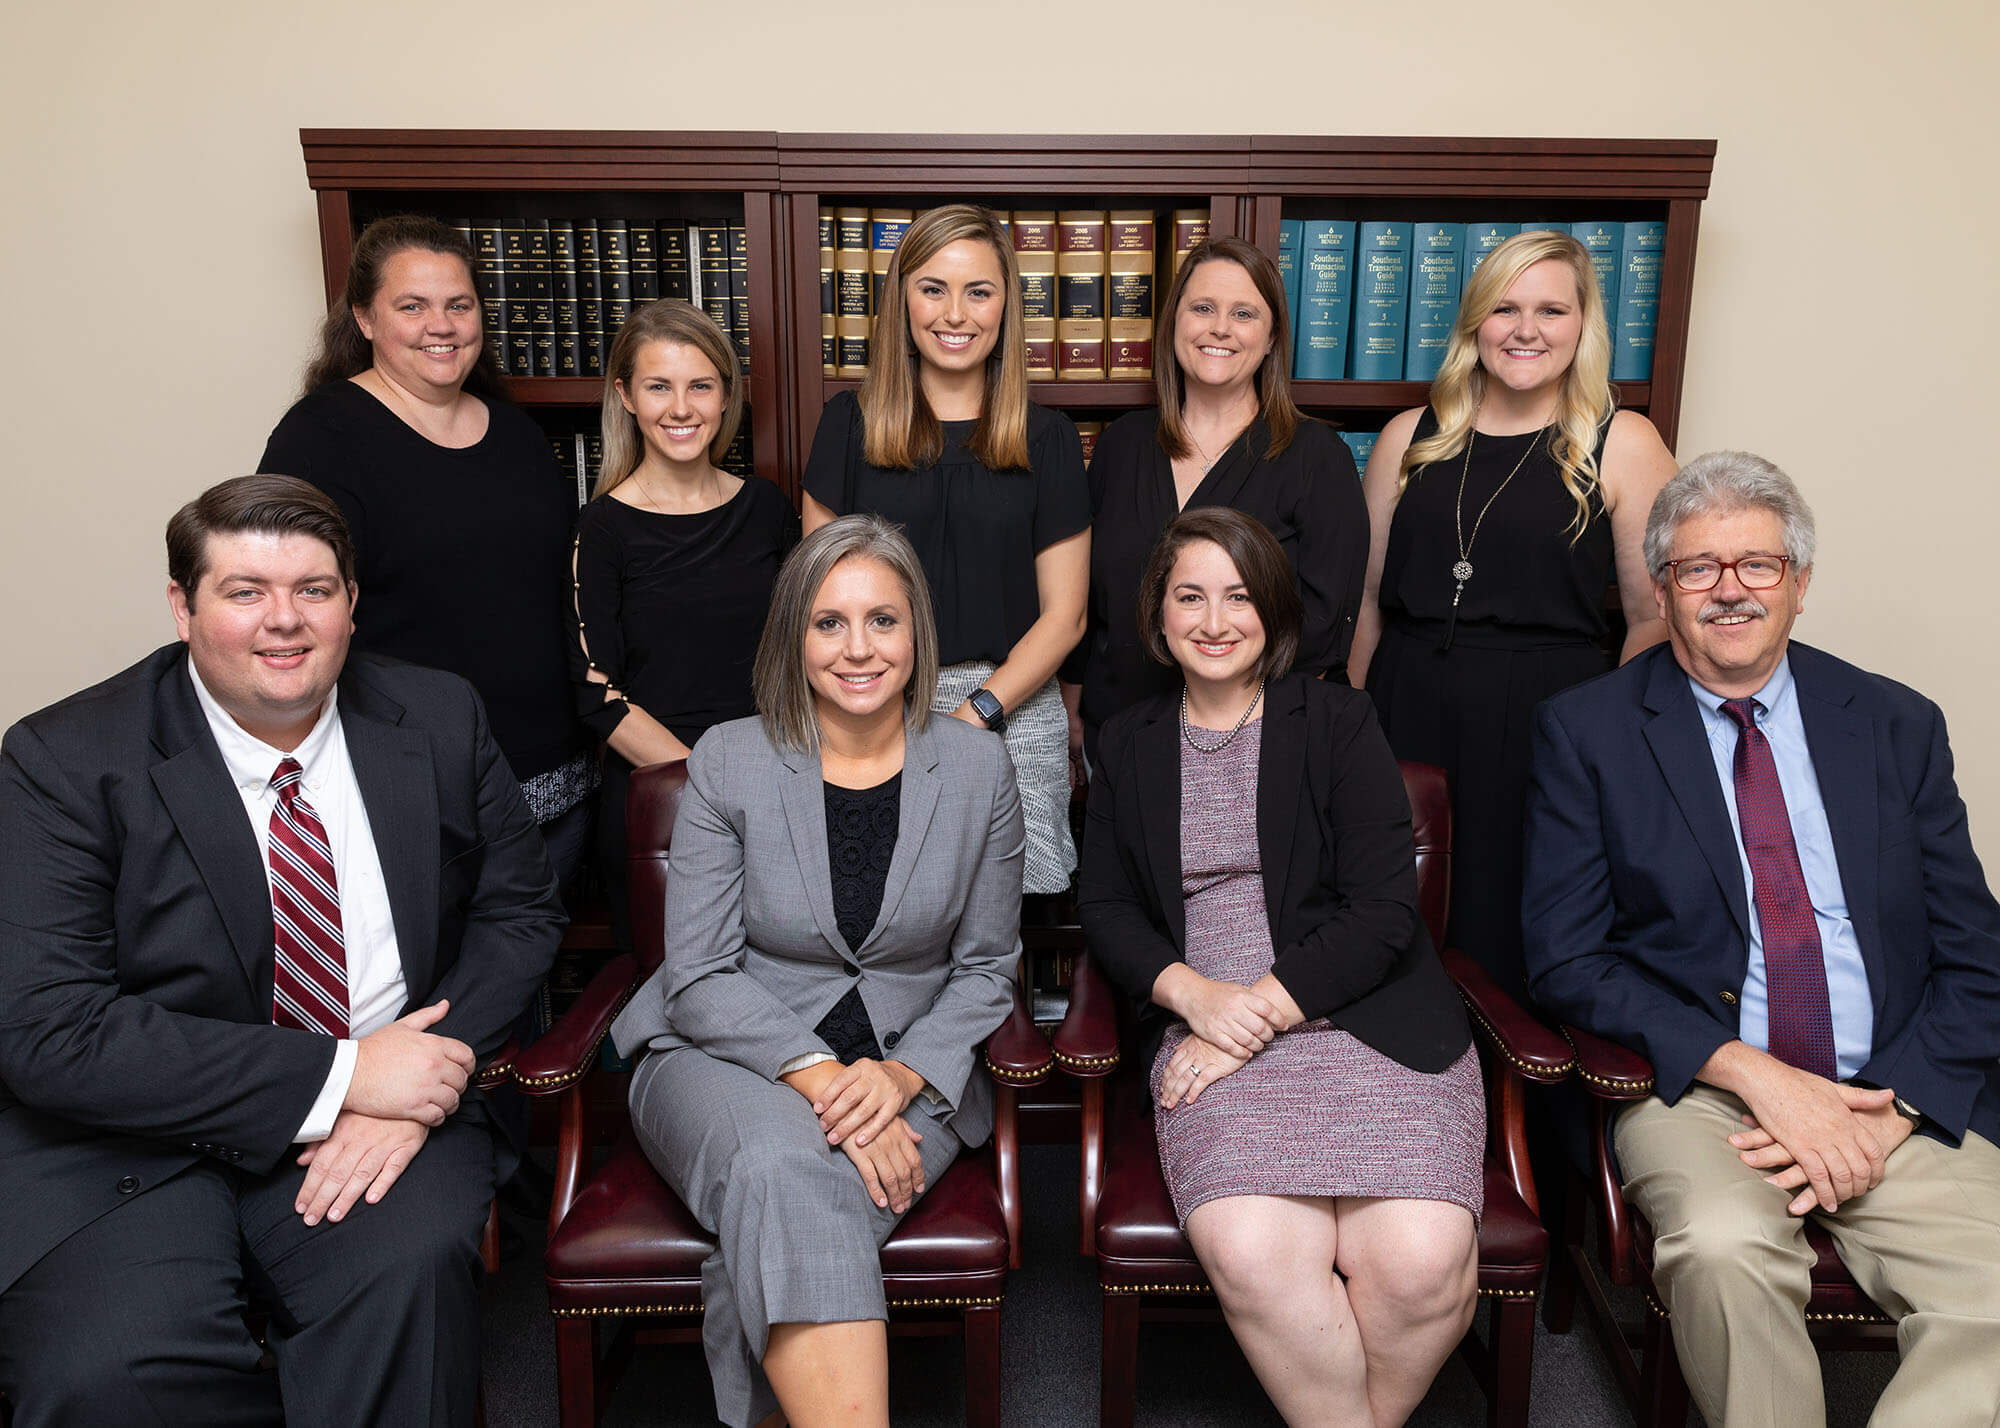 The attorneys and staff together in a group portrait.